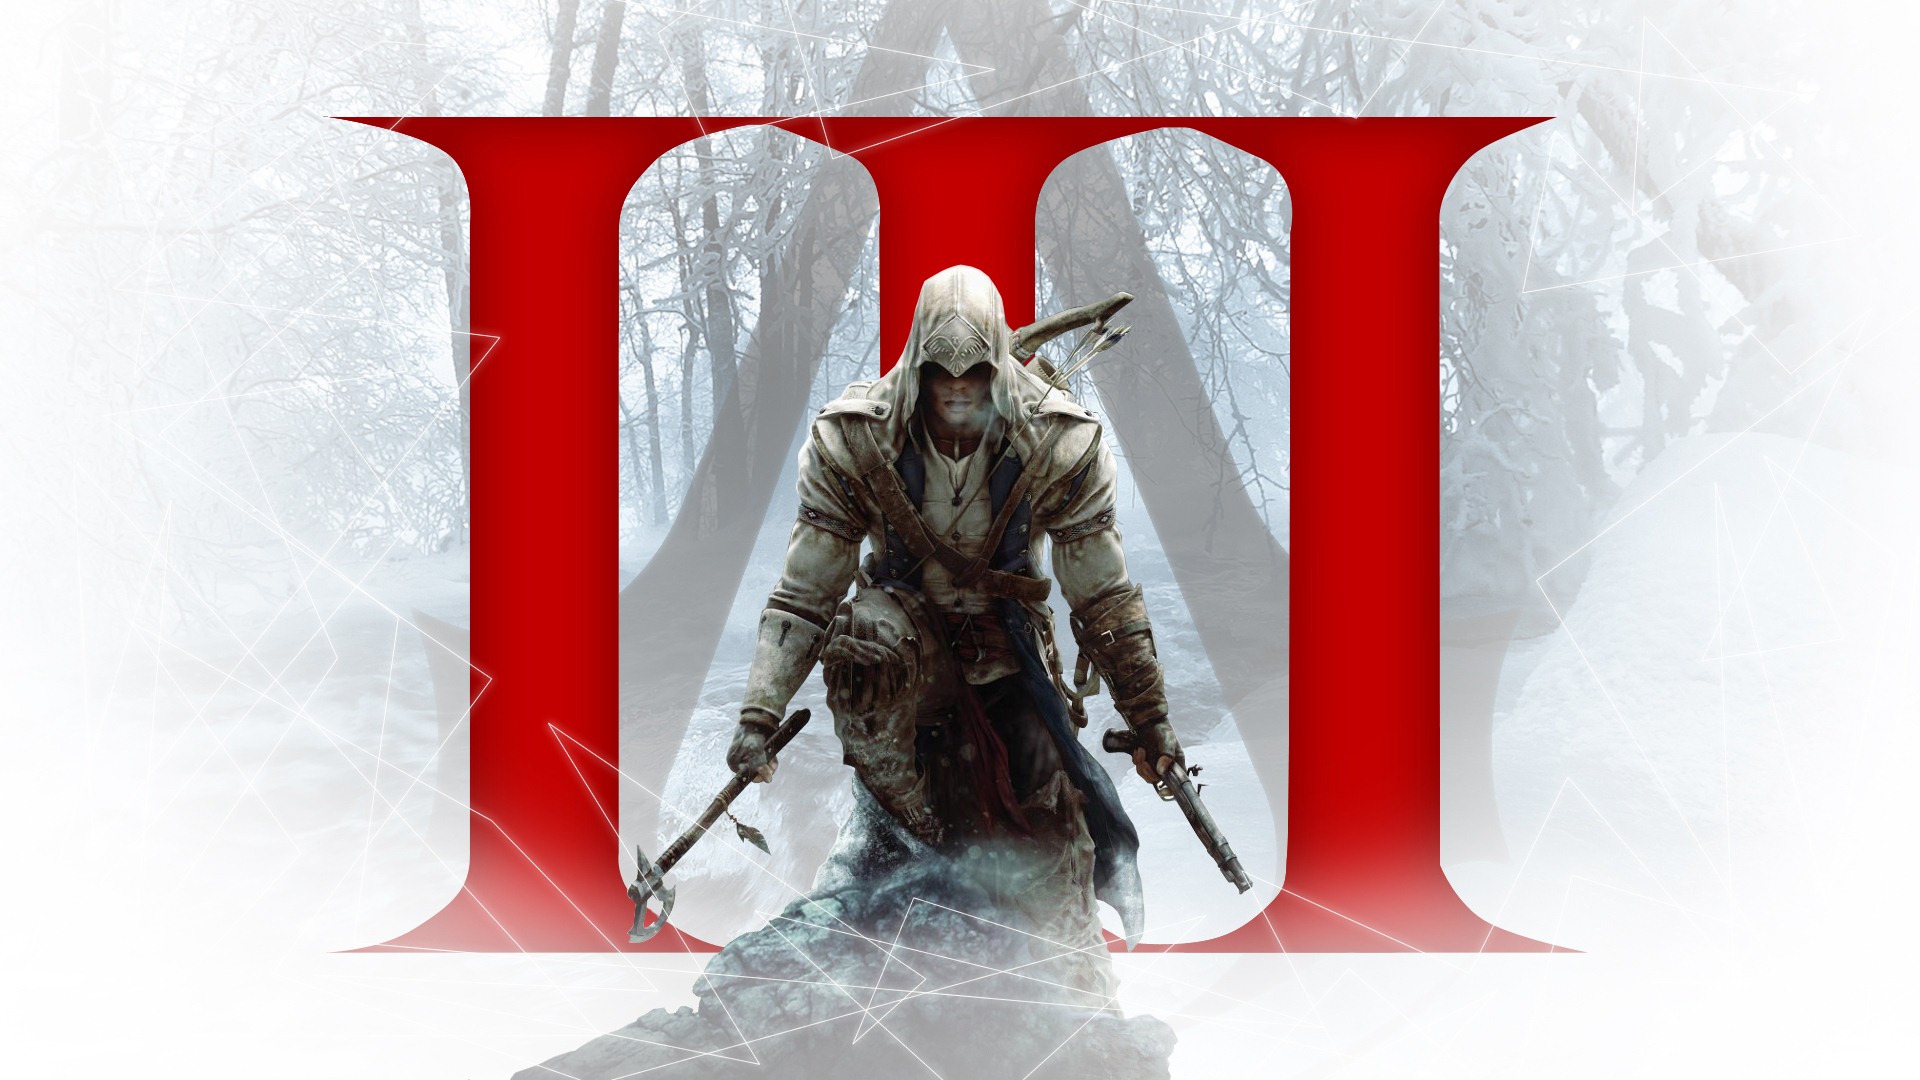 Assassin's Creed 3 HD wallpapers #16 - 1920x1080